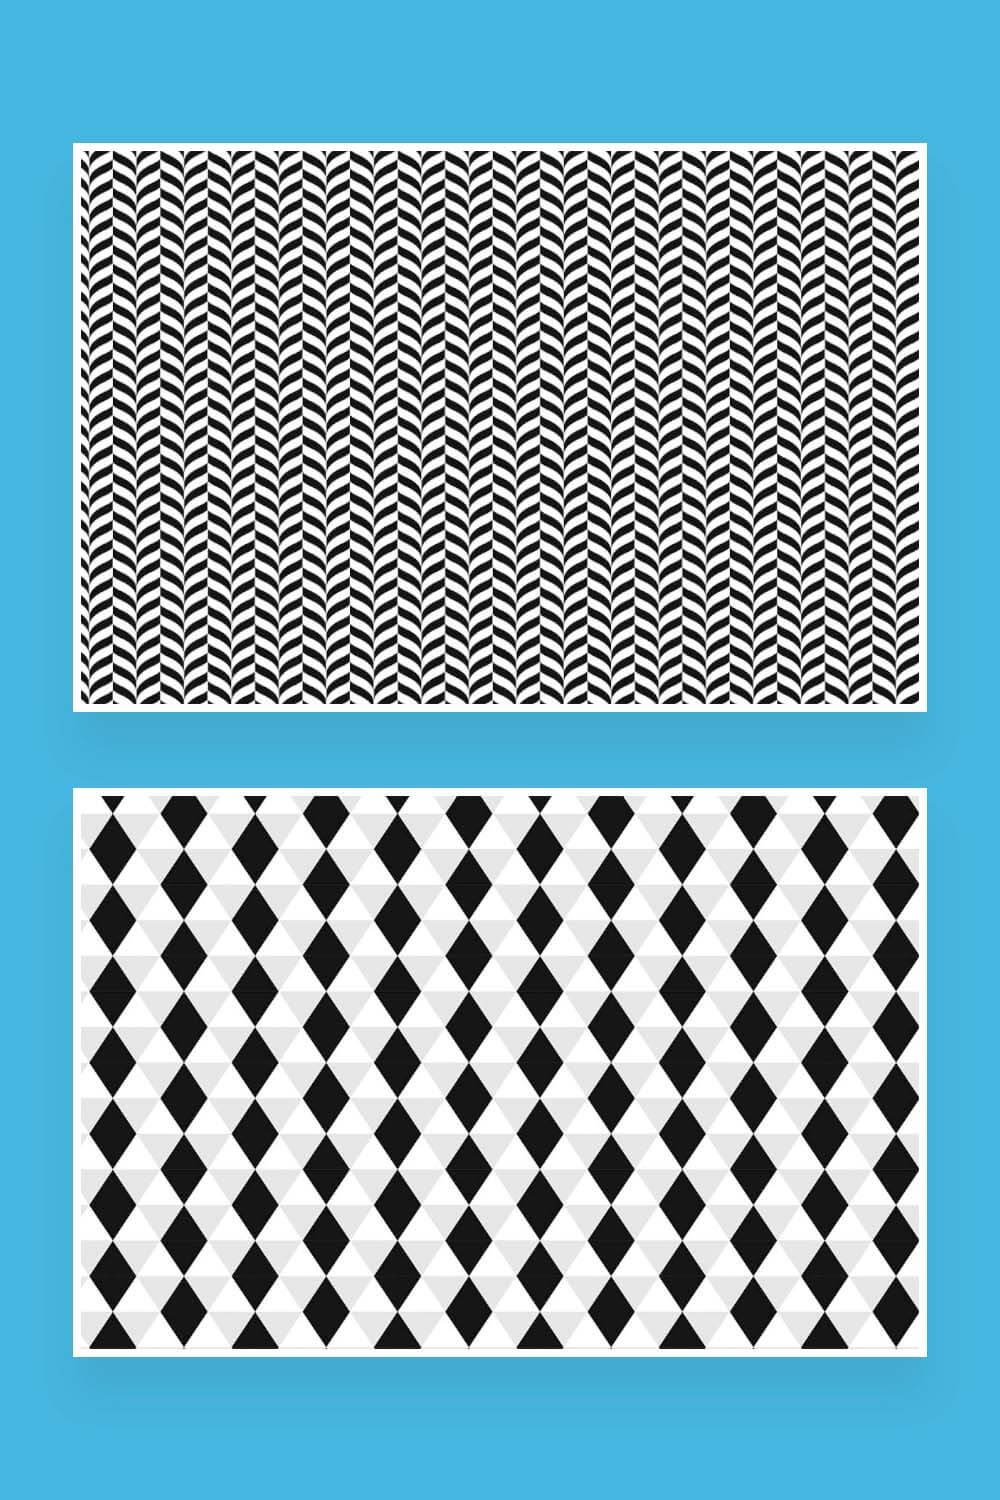 Two pictures with geometric seamless patterns, curly arrows, black and white rhombuses.